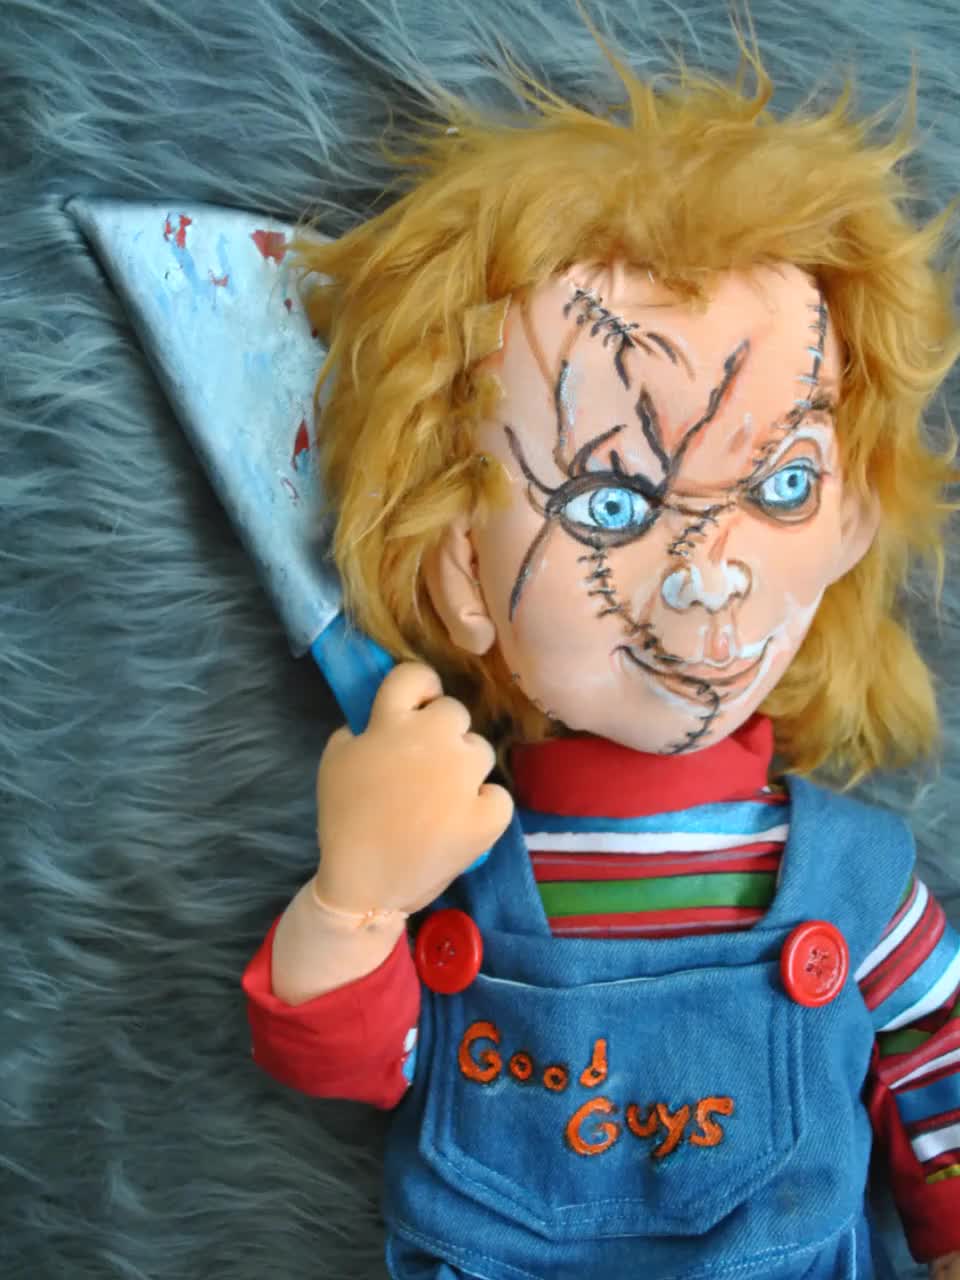 Good Guy Handmade Doll Inspired by Chucky the Realistic